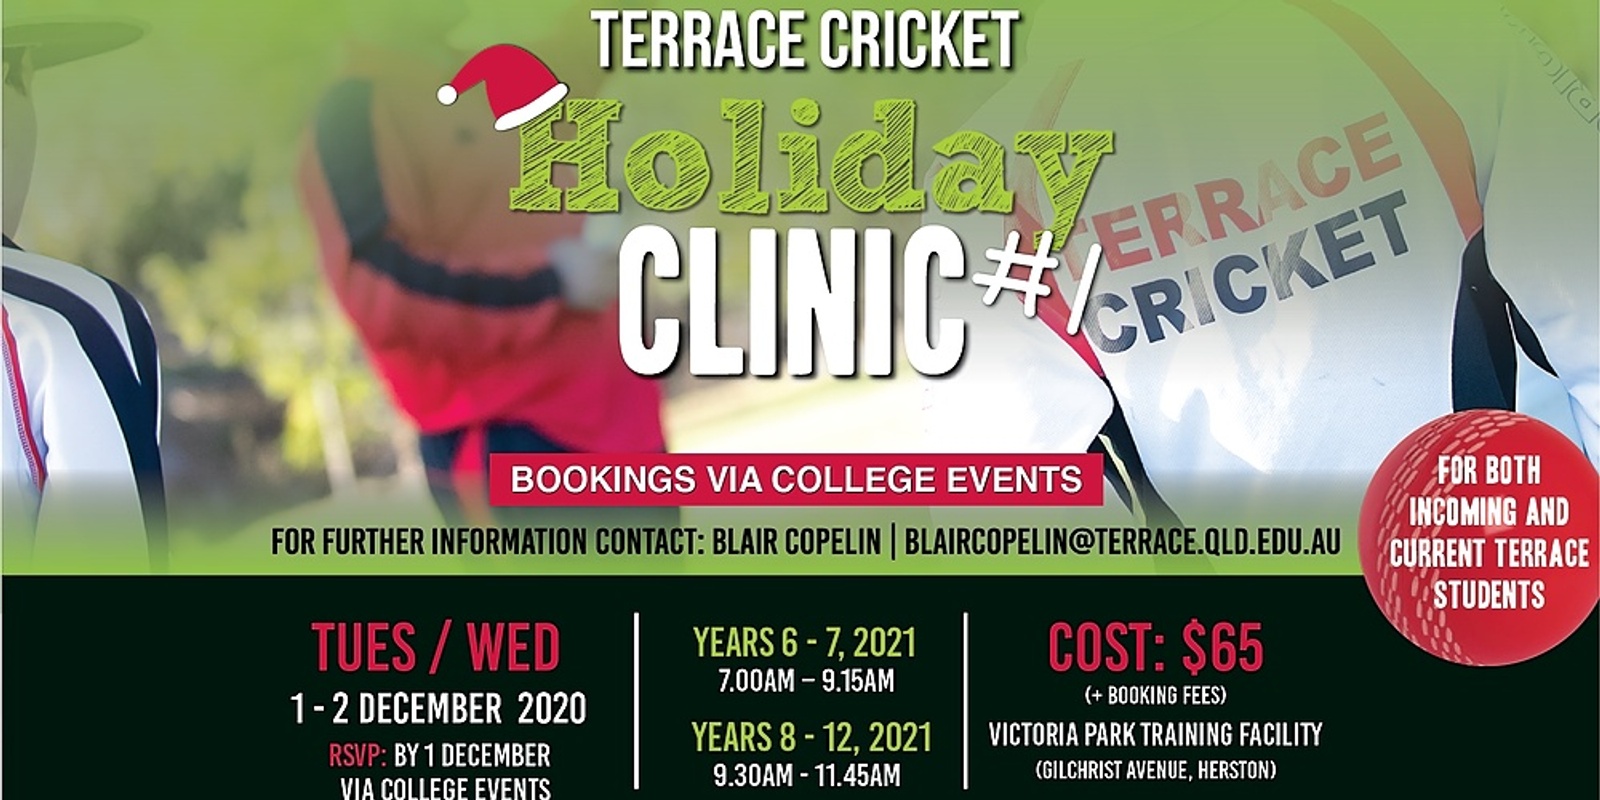 Banner image for Terrace Cricket Holiday Clinic #1